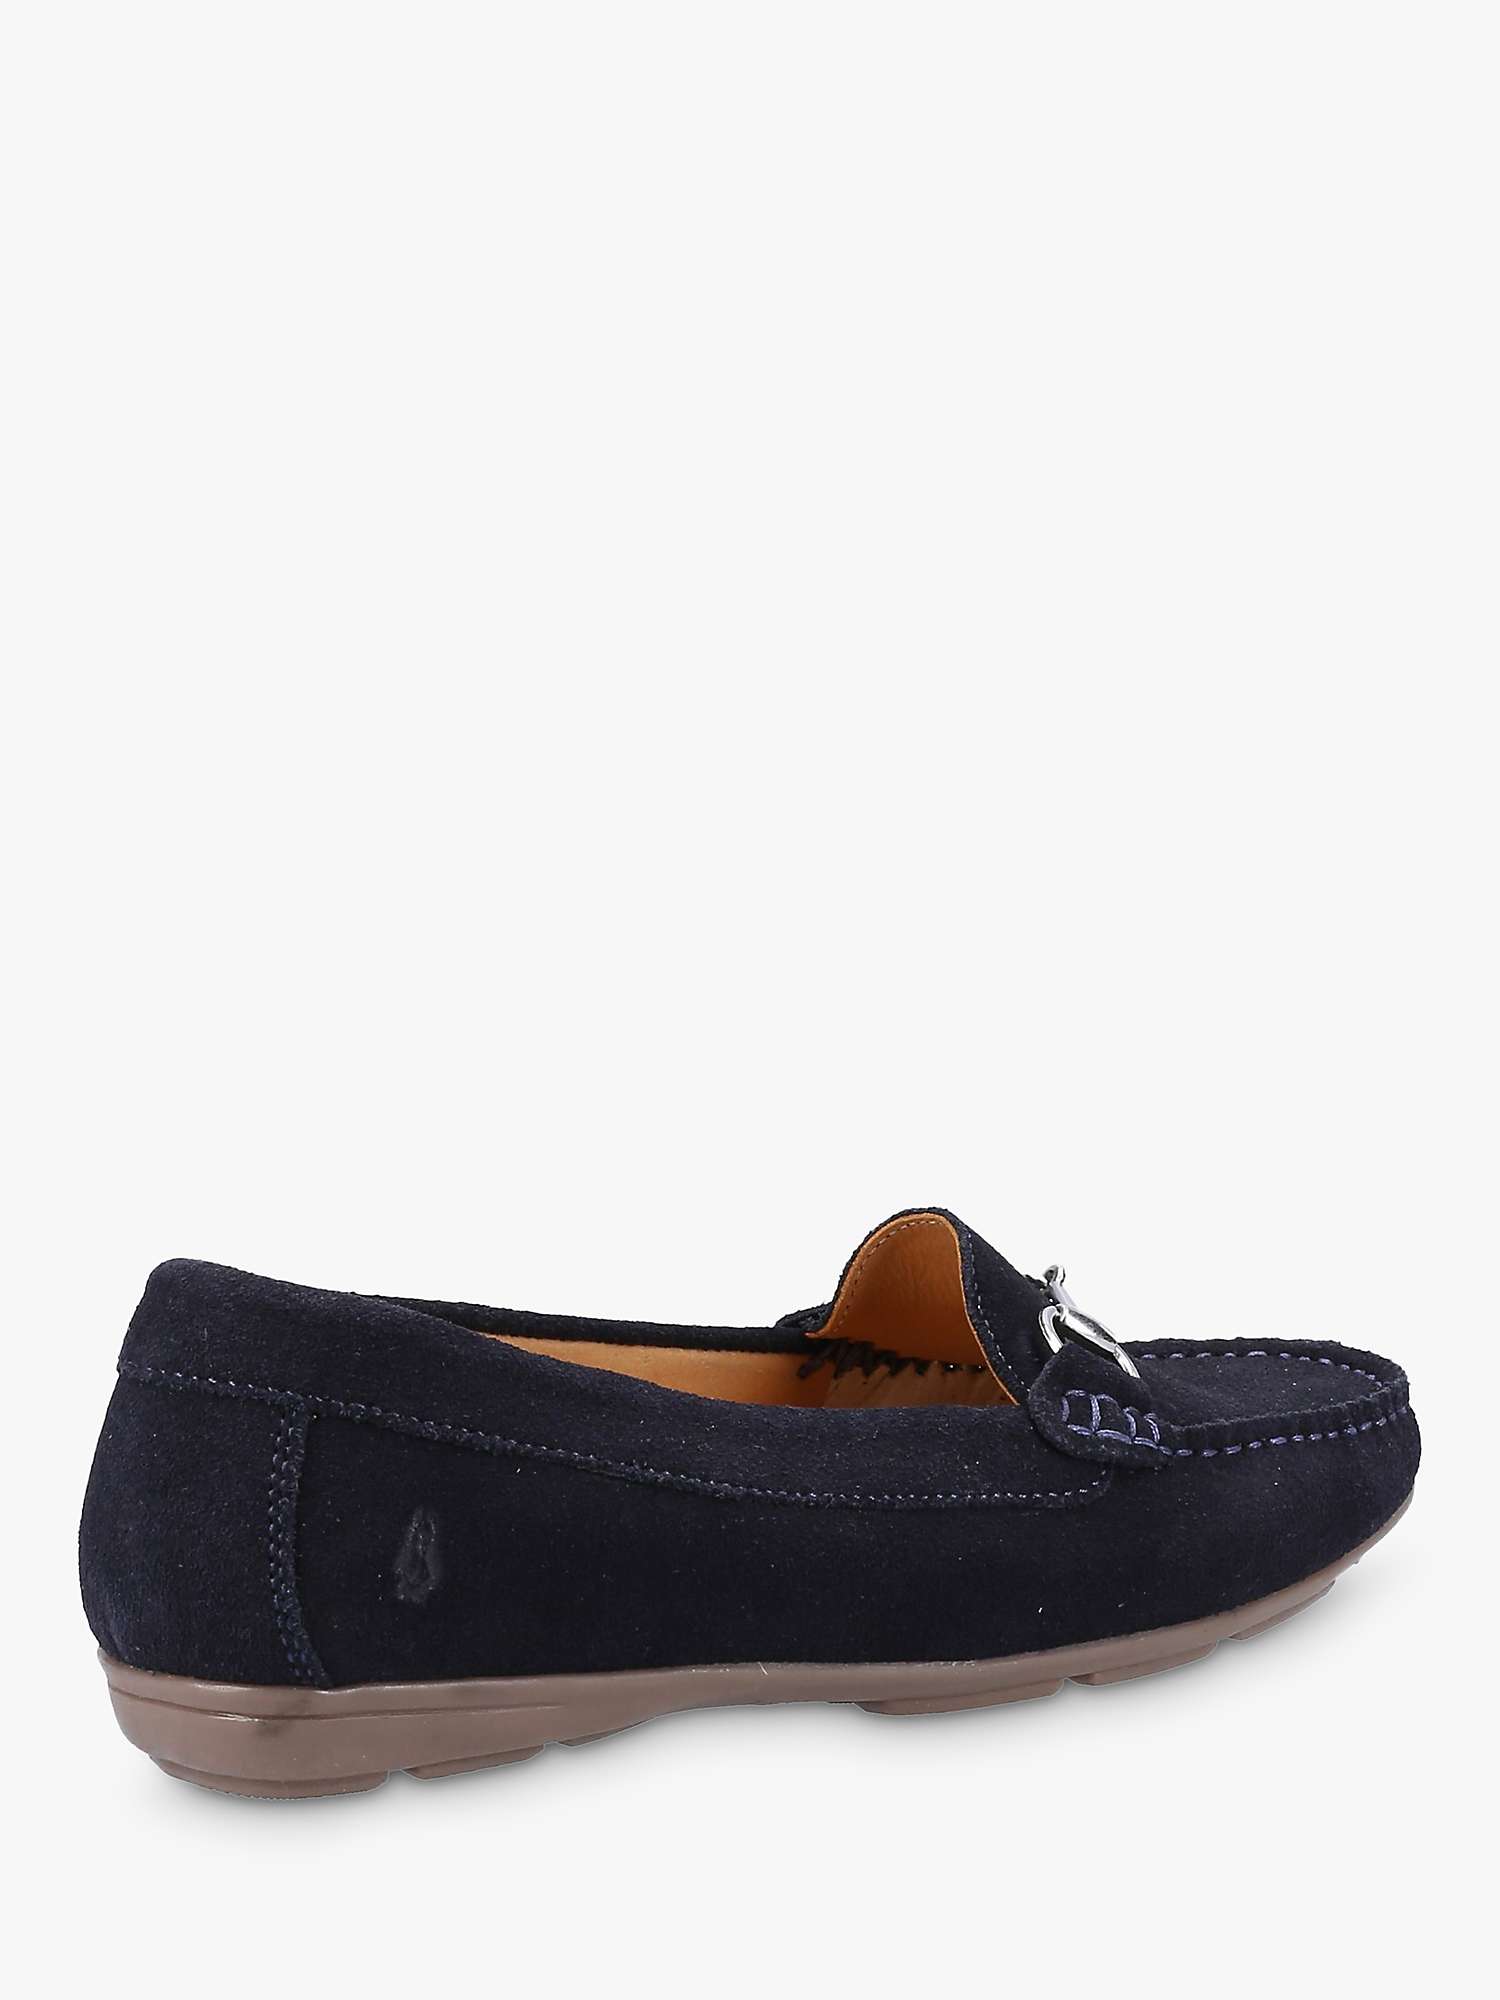 Buy Hush Puppies Molly Snaffle Nubuck Leather Loafers Online at johnlewis.com